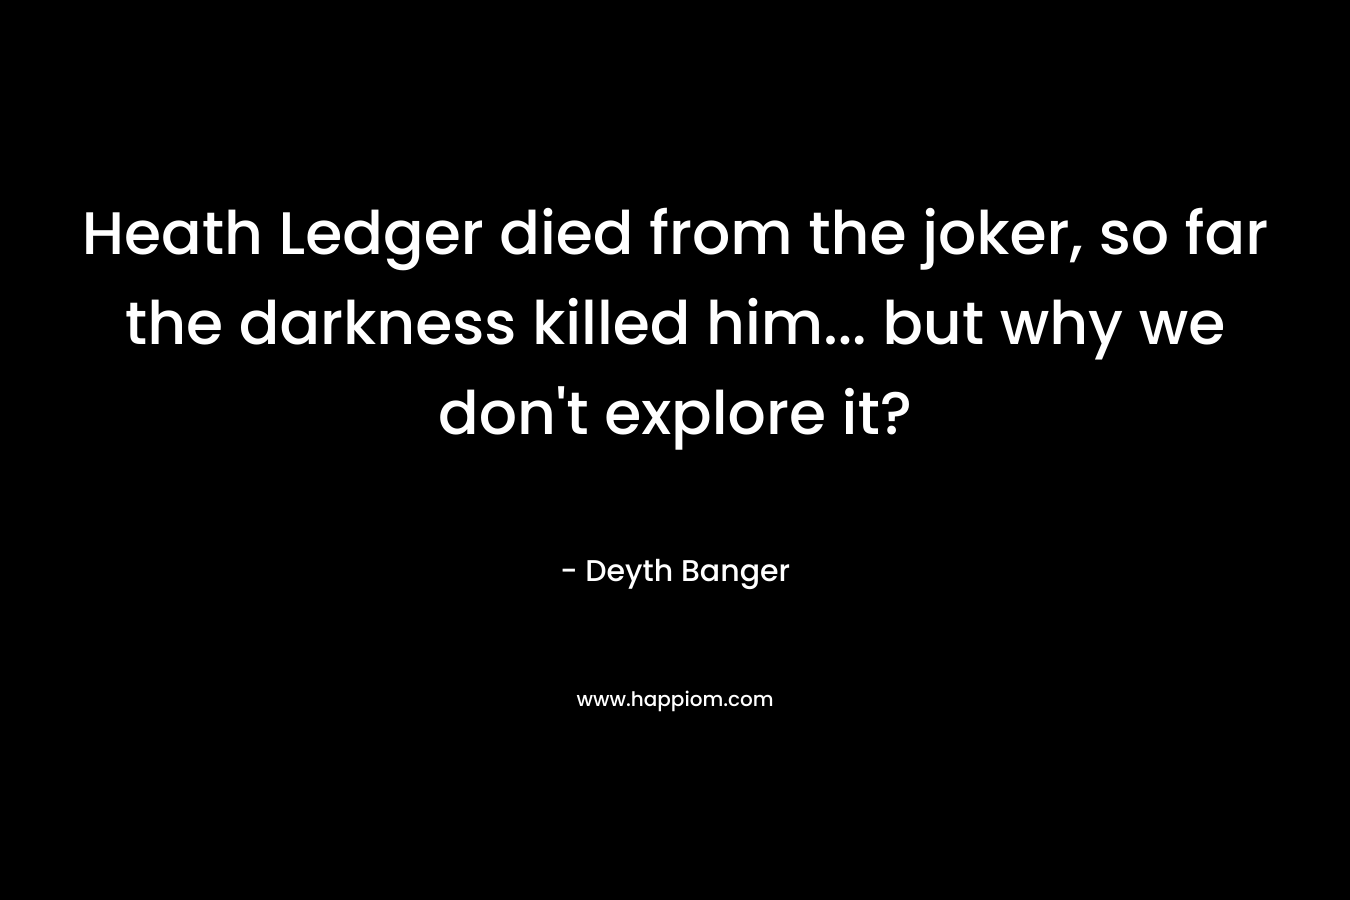 Heath Ledger died from the joker, so far the darkness killed him... but why we don't explore it?